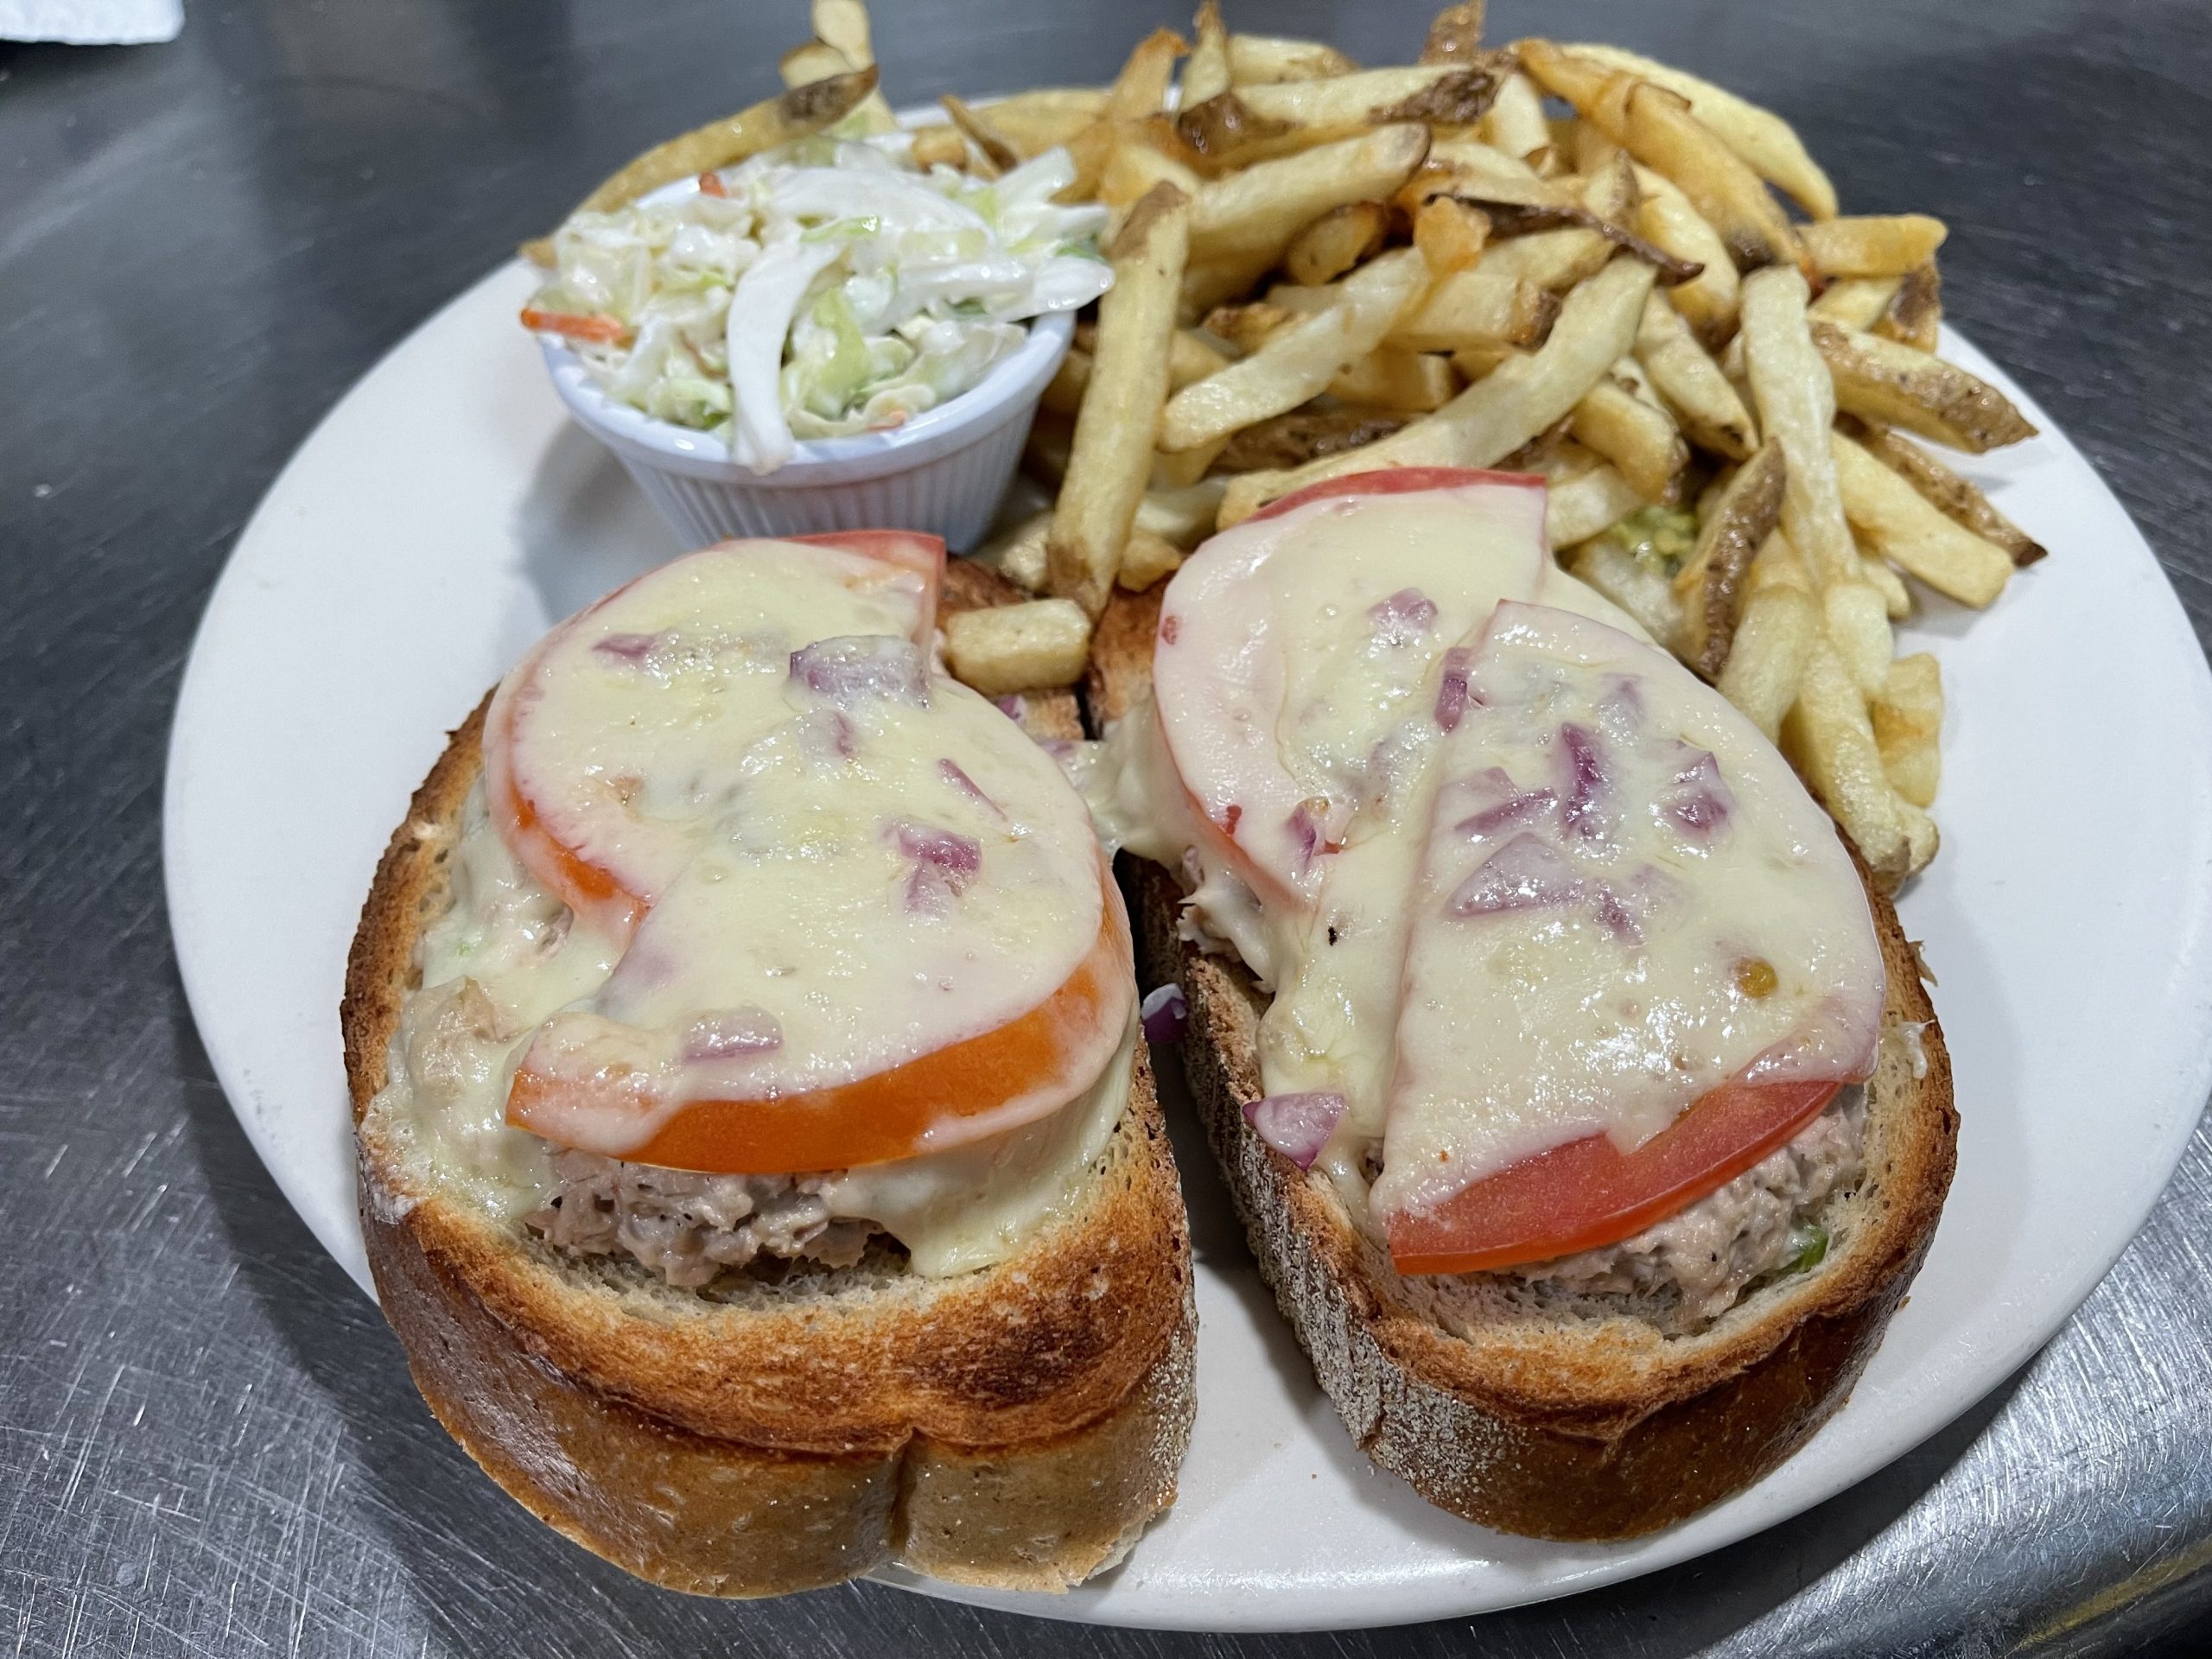 A sandwich with meat and tomato on a plate with french fries.